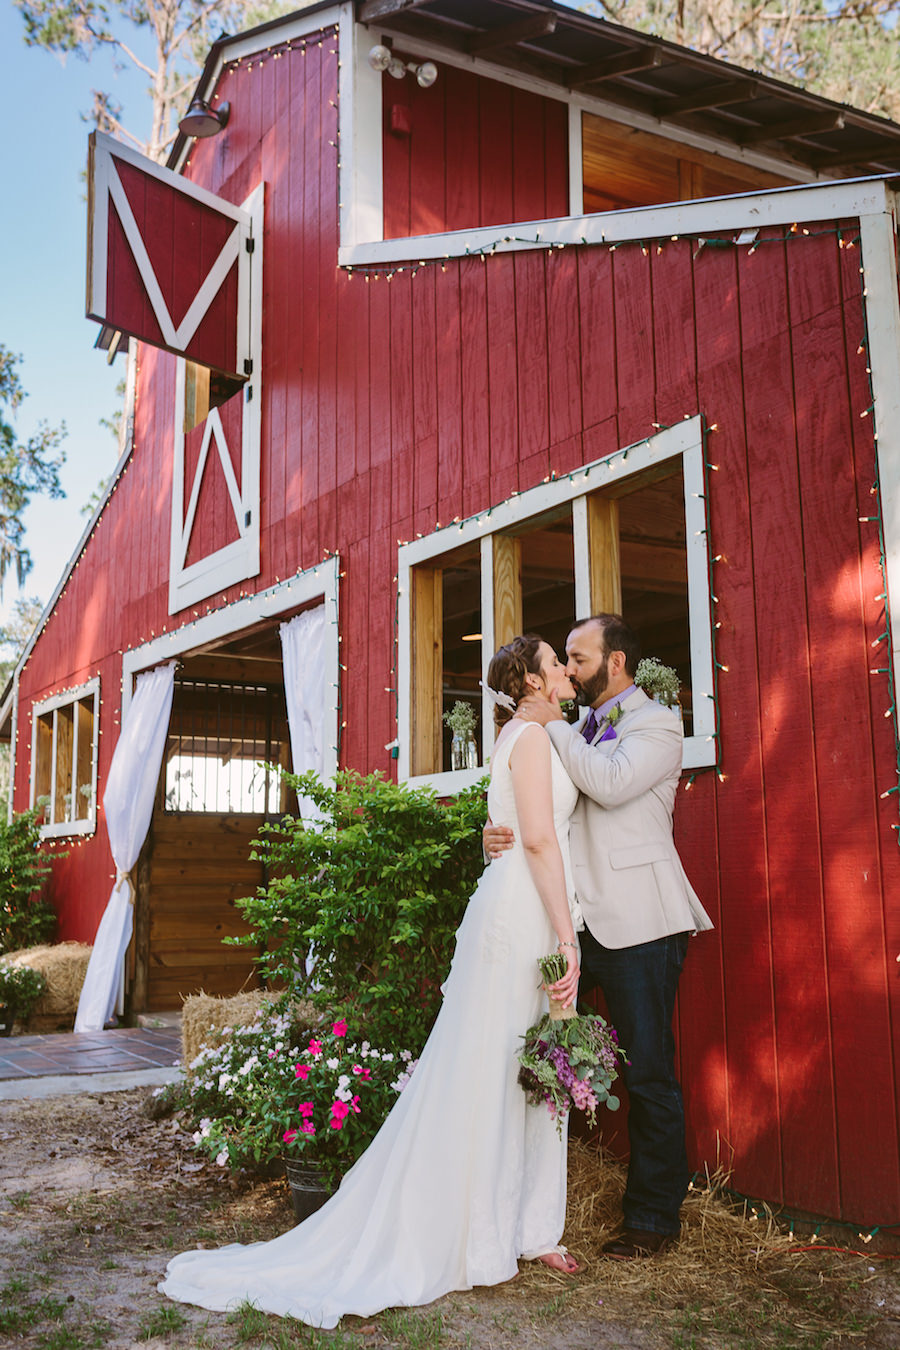 Outdoor, Rustic Bride and Groom Wedding Portrait | Tampa Bay Wedding Venue The Barn at Crescent Lake | Old McMicky's Farm